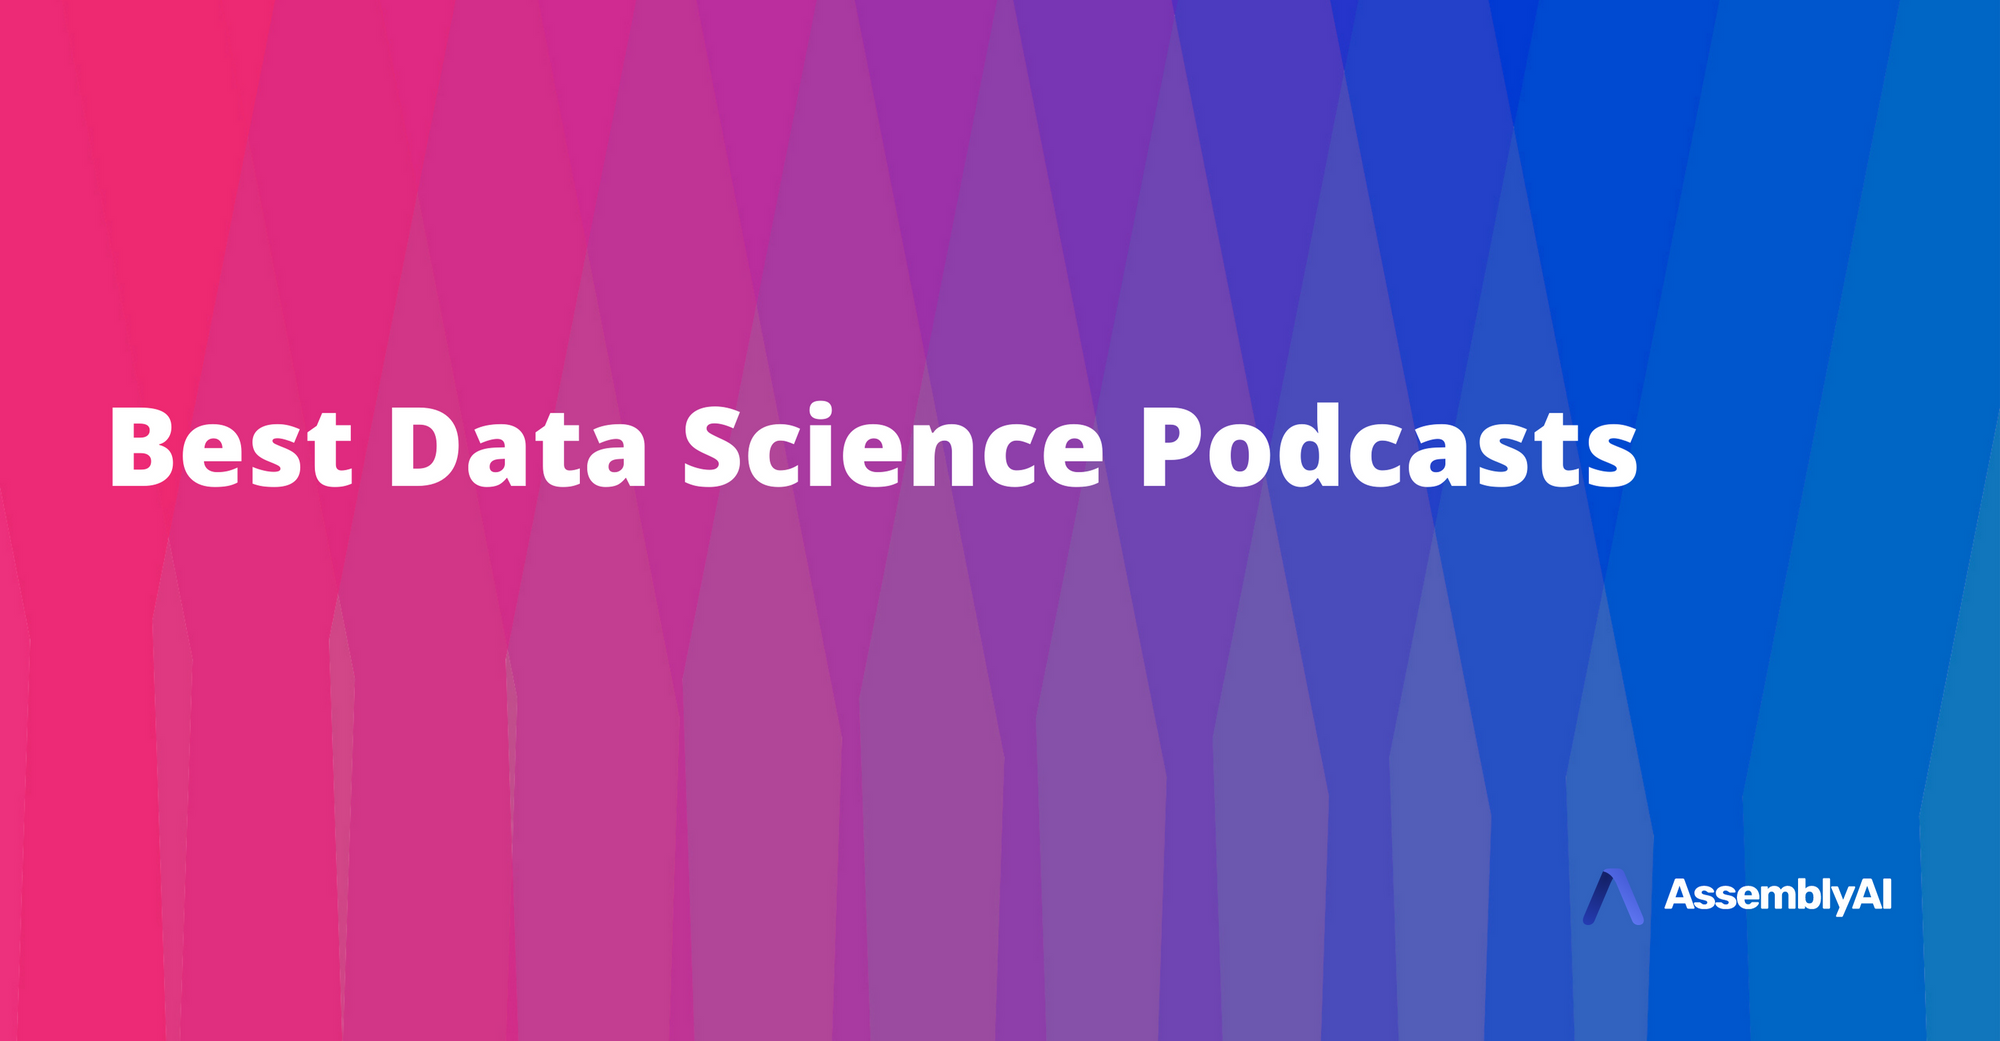 Data Science Podcasts to Listen to Now